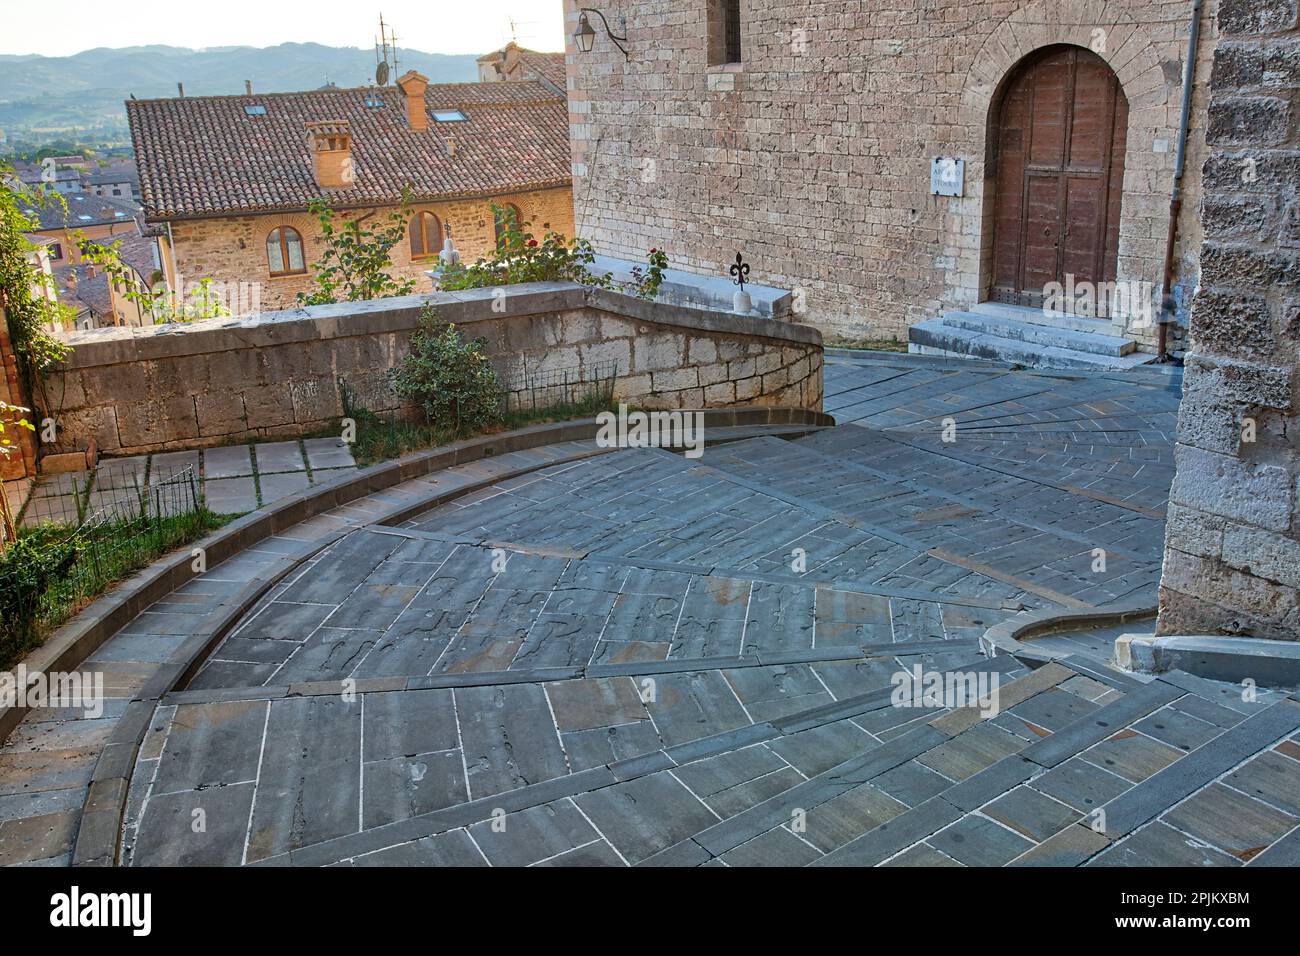 Italy, Umbria. Wide curved stairs leading down through the medieval town of Gubbio. Stock Photo